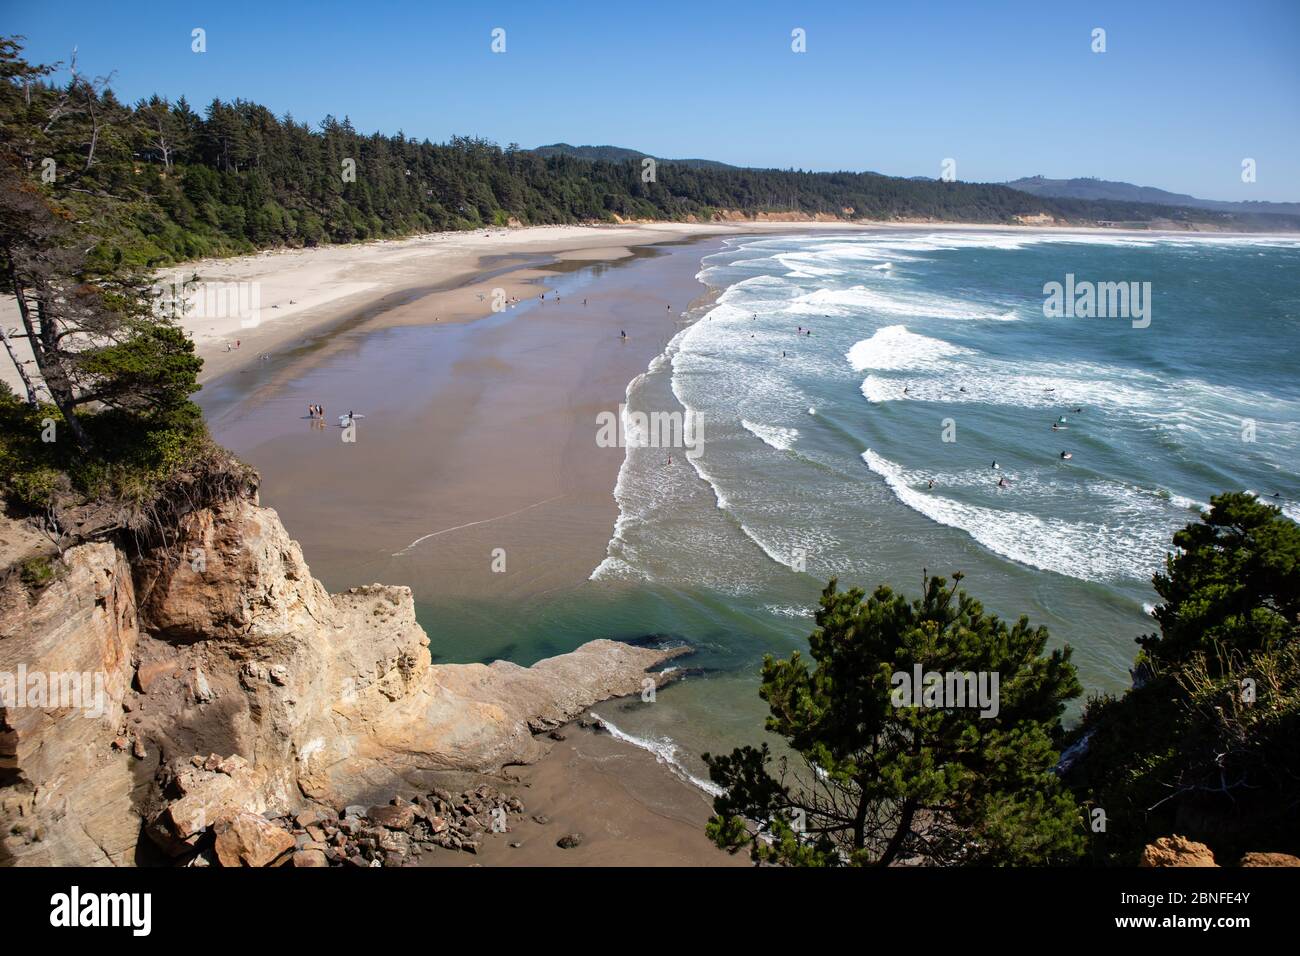 Otter Crest State Scenic Viewpoint at Devils Punch Bowl, Otter Rock, Oregon in August, horizontal Stock Photo